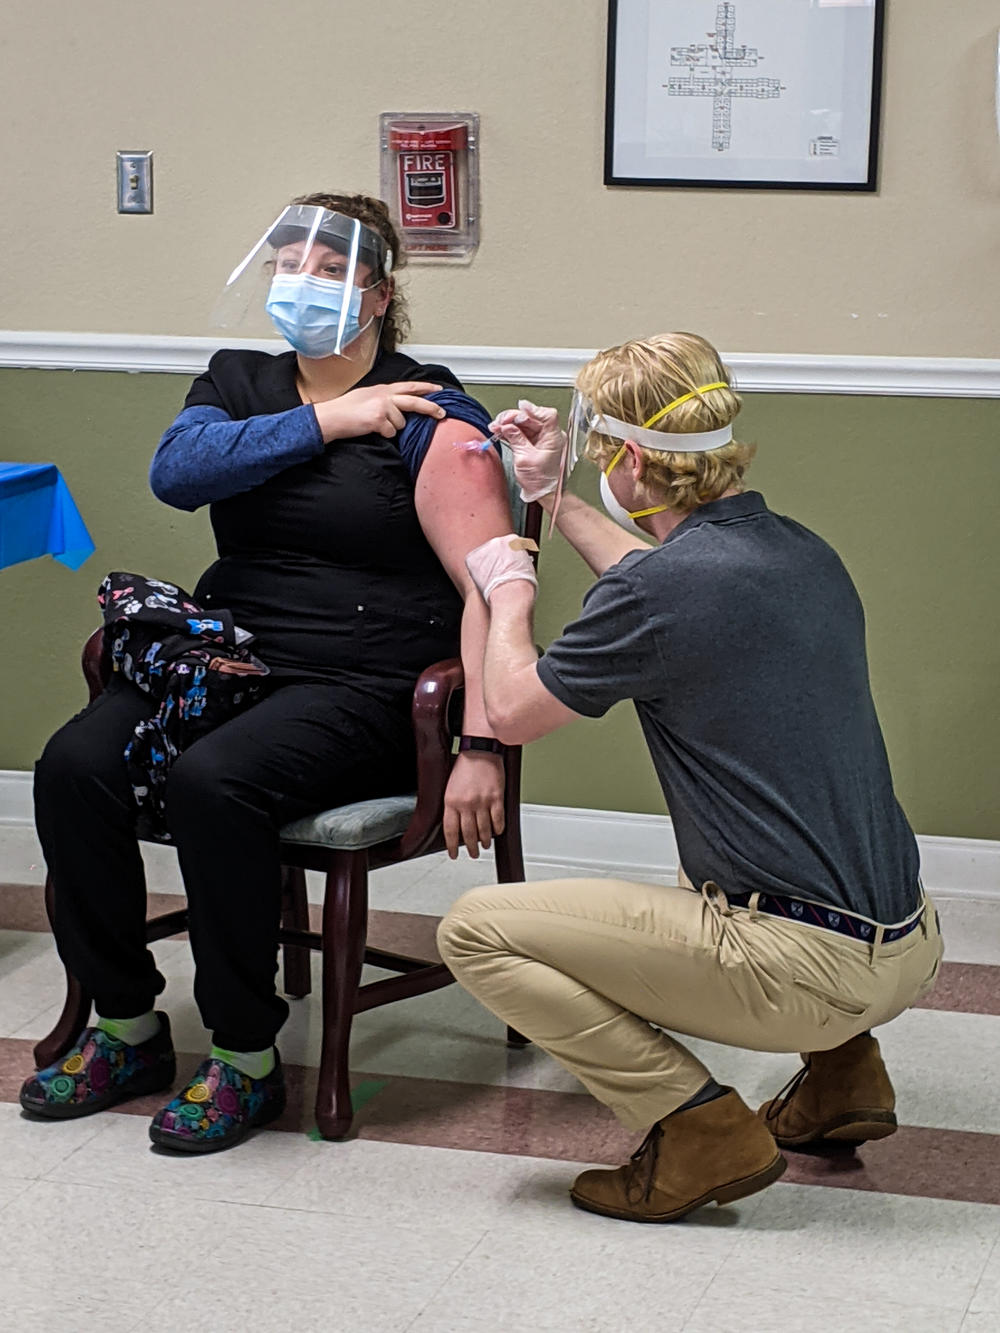 Josiah Howard (right) was one of two CVS pharmacists who administered the Moderna COVID-19 vaccine to staff members and residents at the Brian Center/Cabarrus nursing home on Jan. 14, 2021.